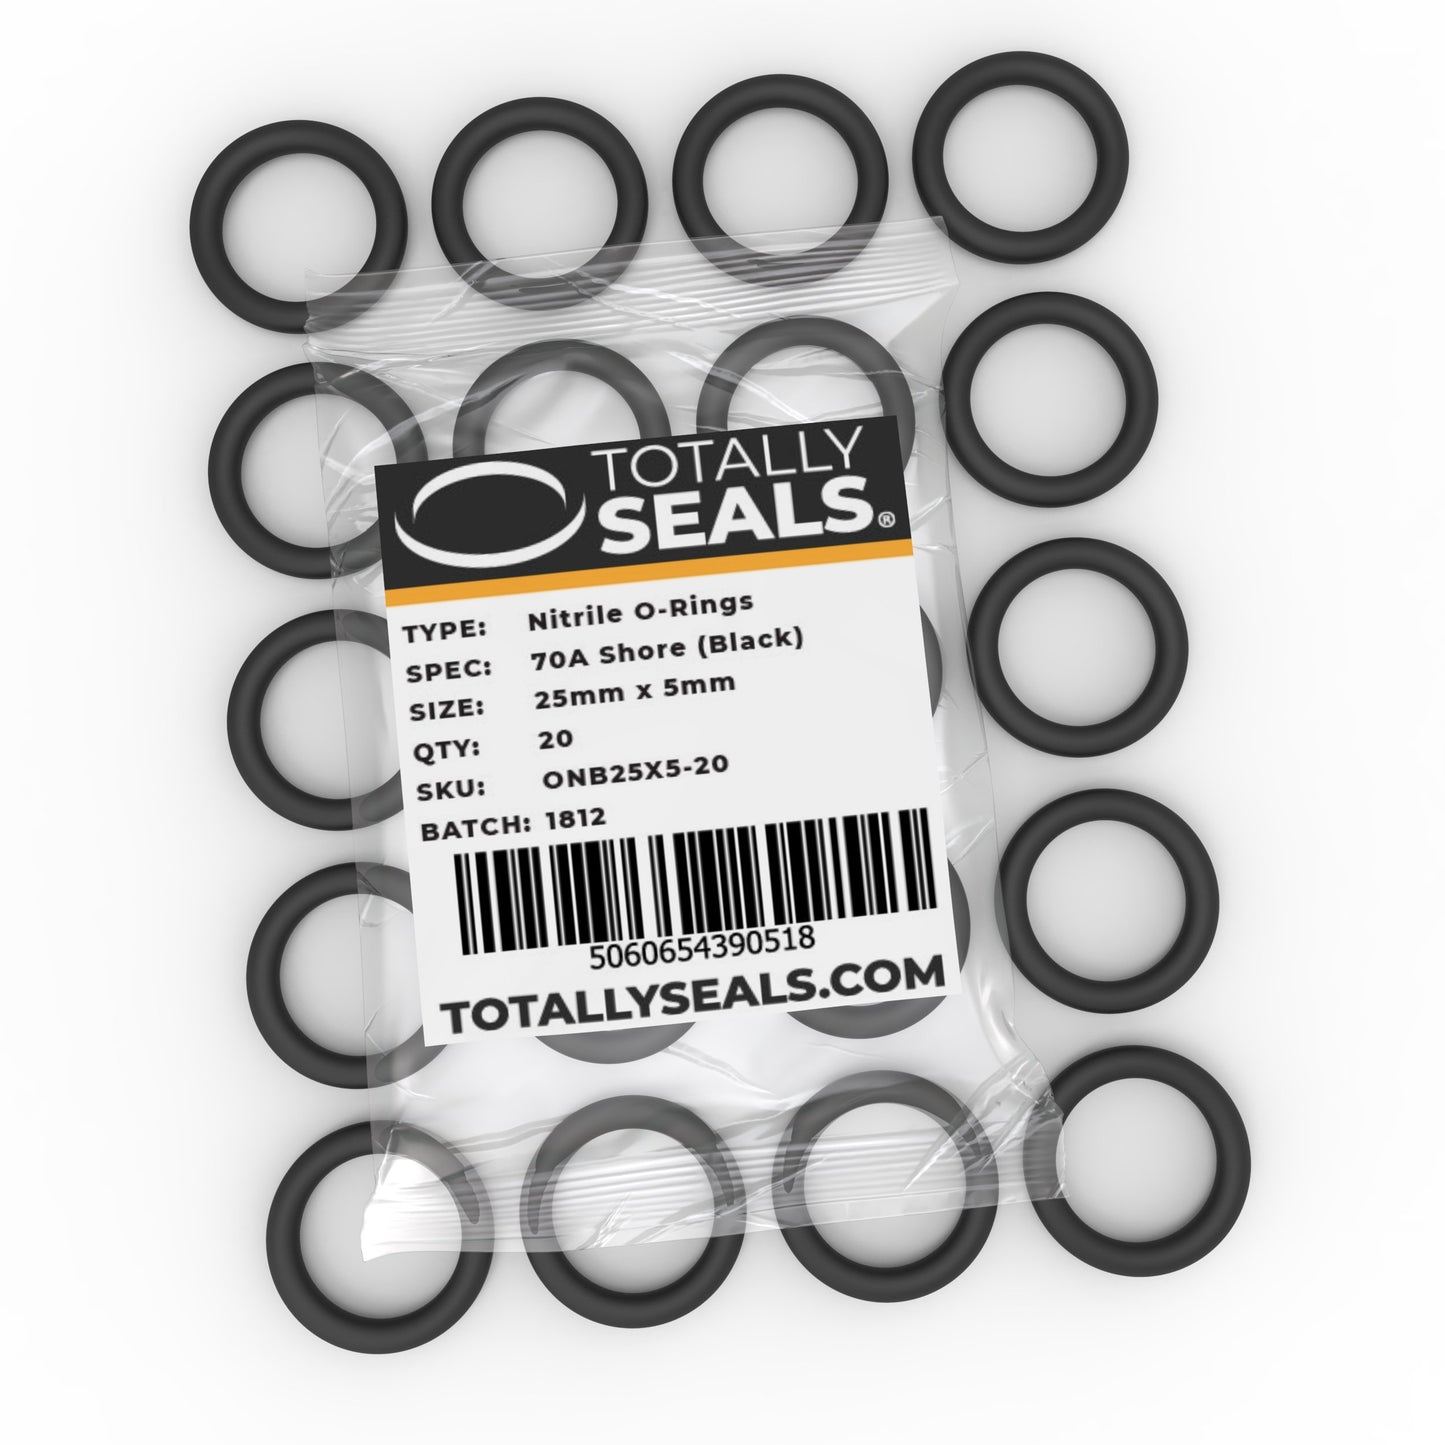 25mm x 5mm (35mm OD) Nitrile O-Rings - Totally Seals®